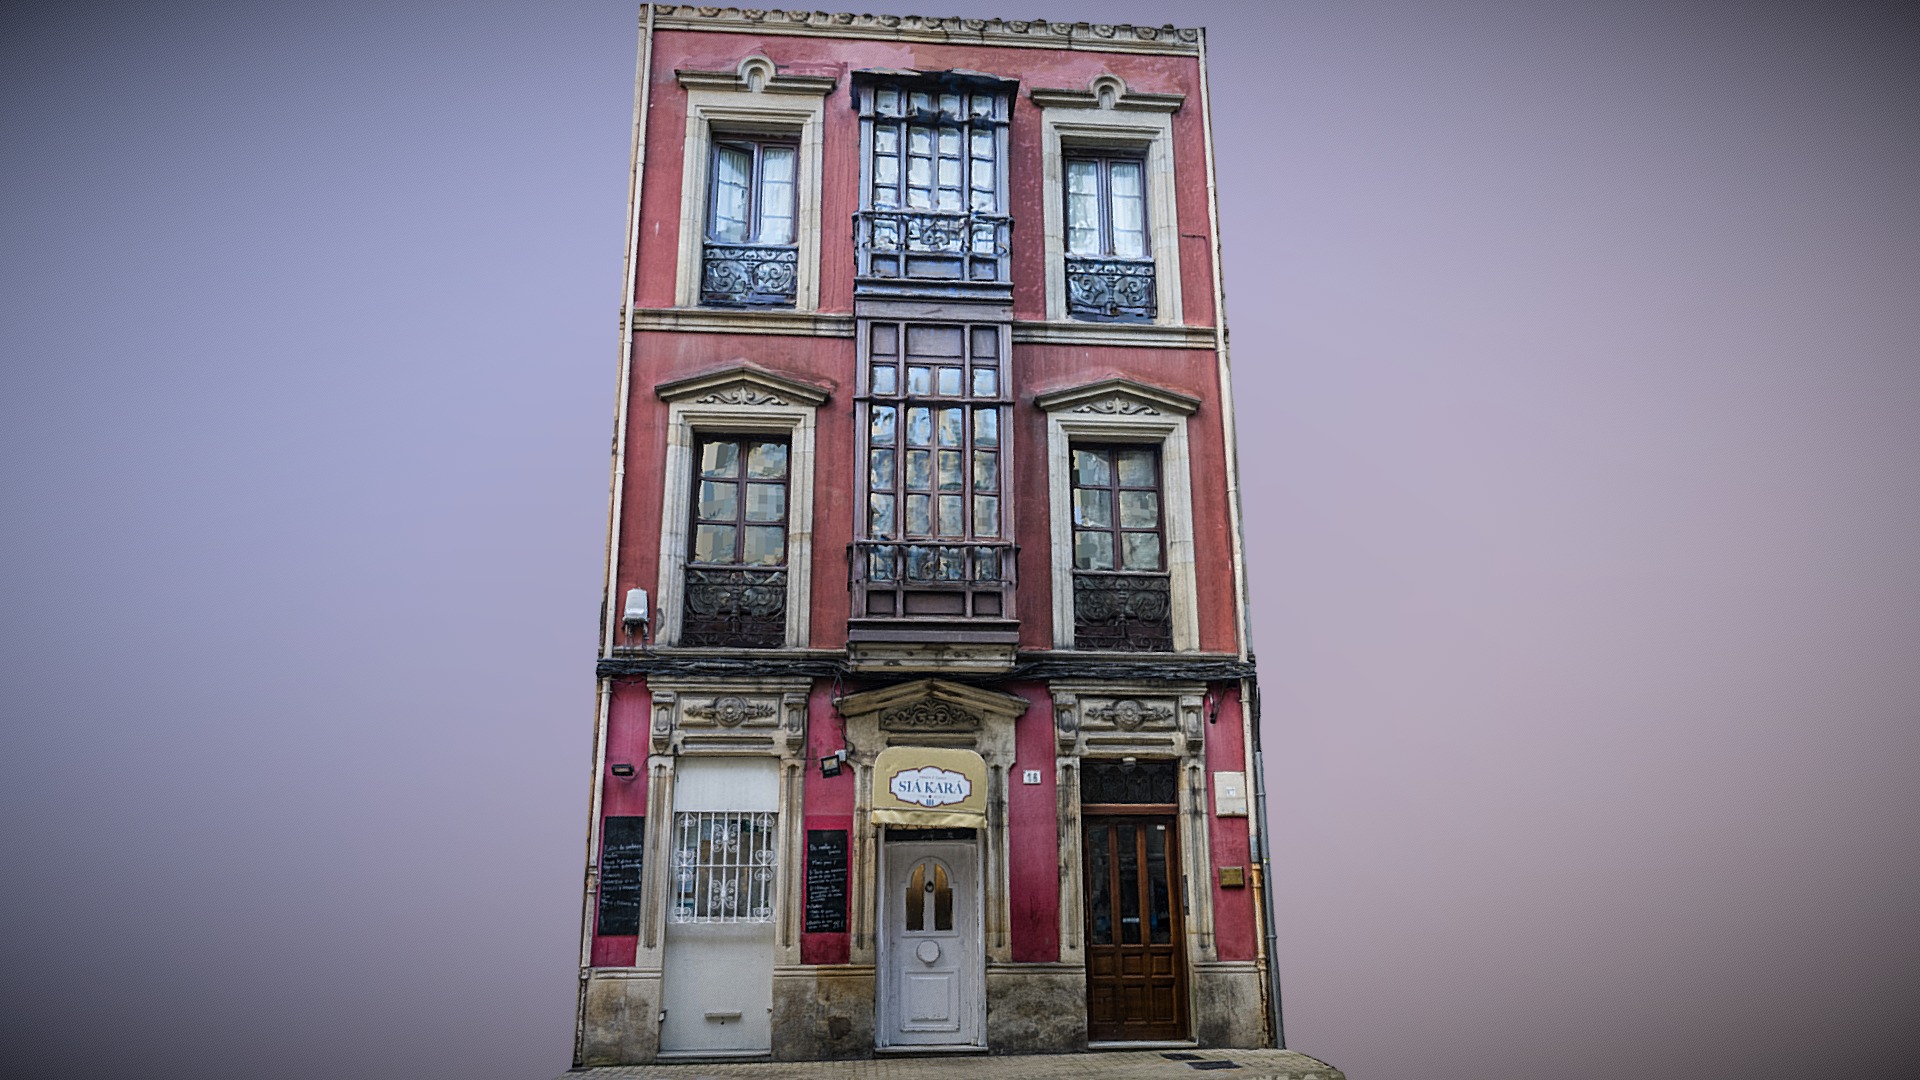 3D model Neoclassical facade photogrammetry scan - This is a 3D model of the Neoclassical facade photogrammetry scan. The 3D model is about a pink and white building.